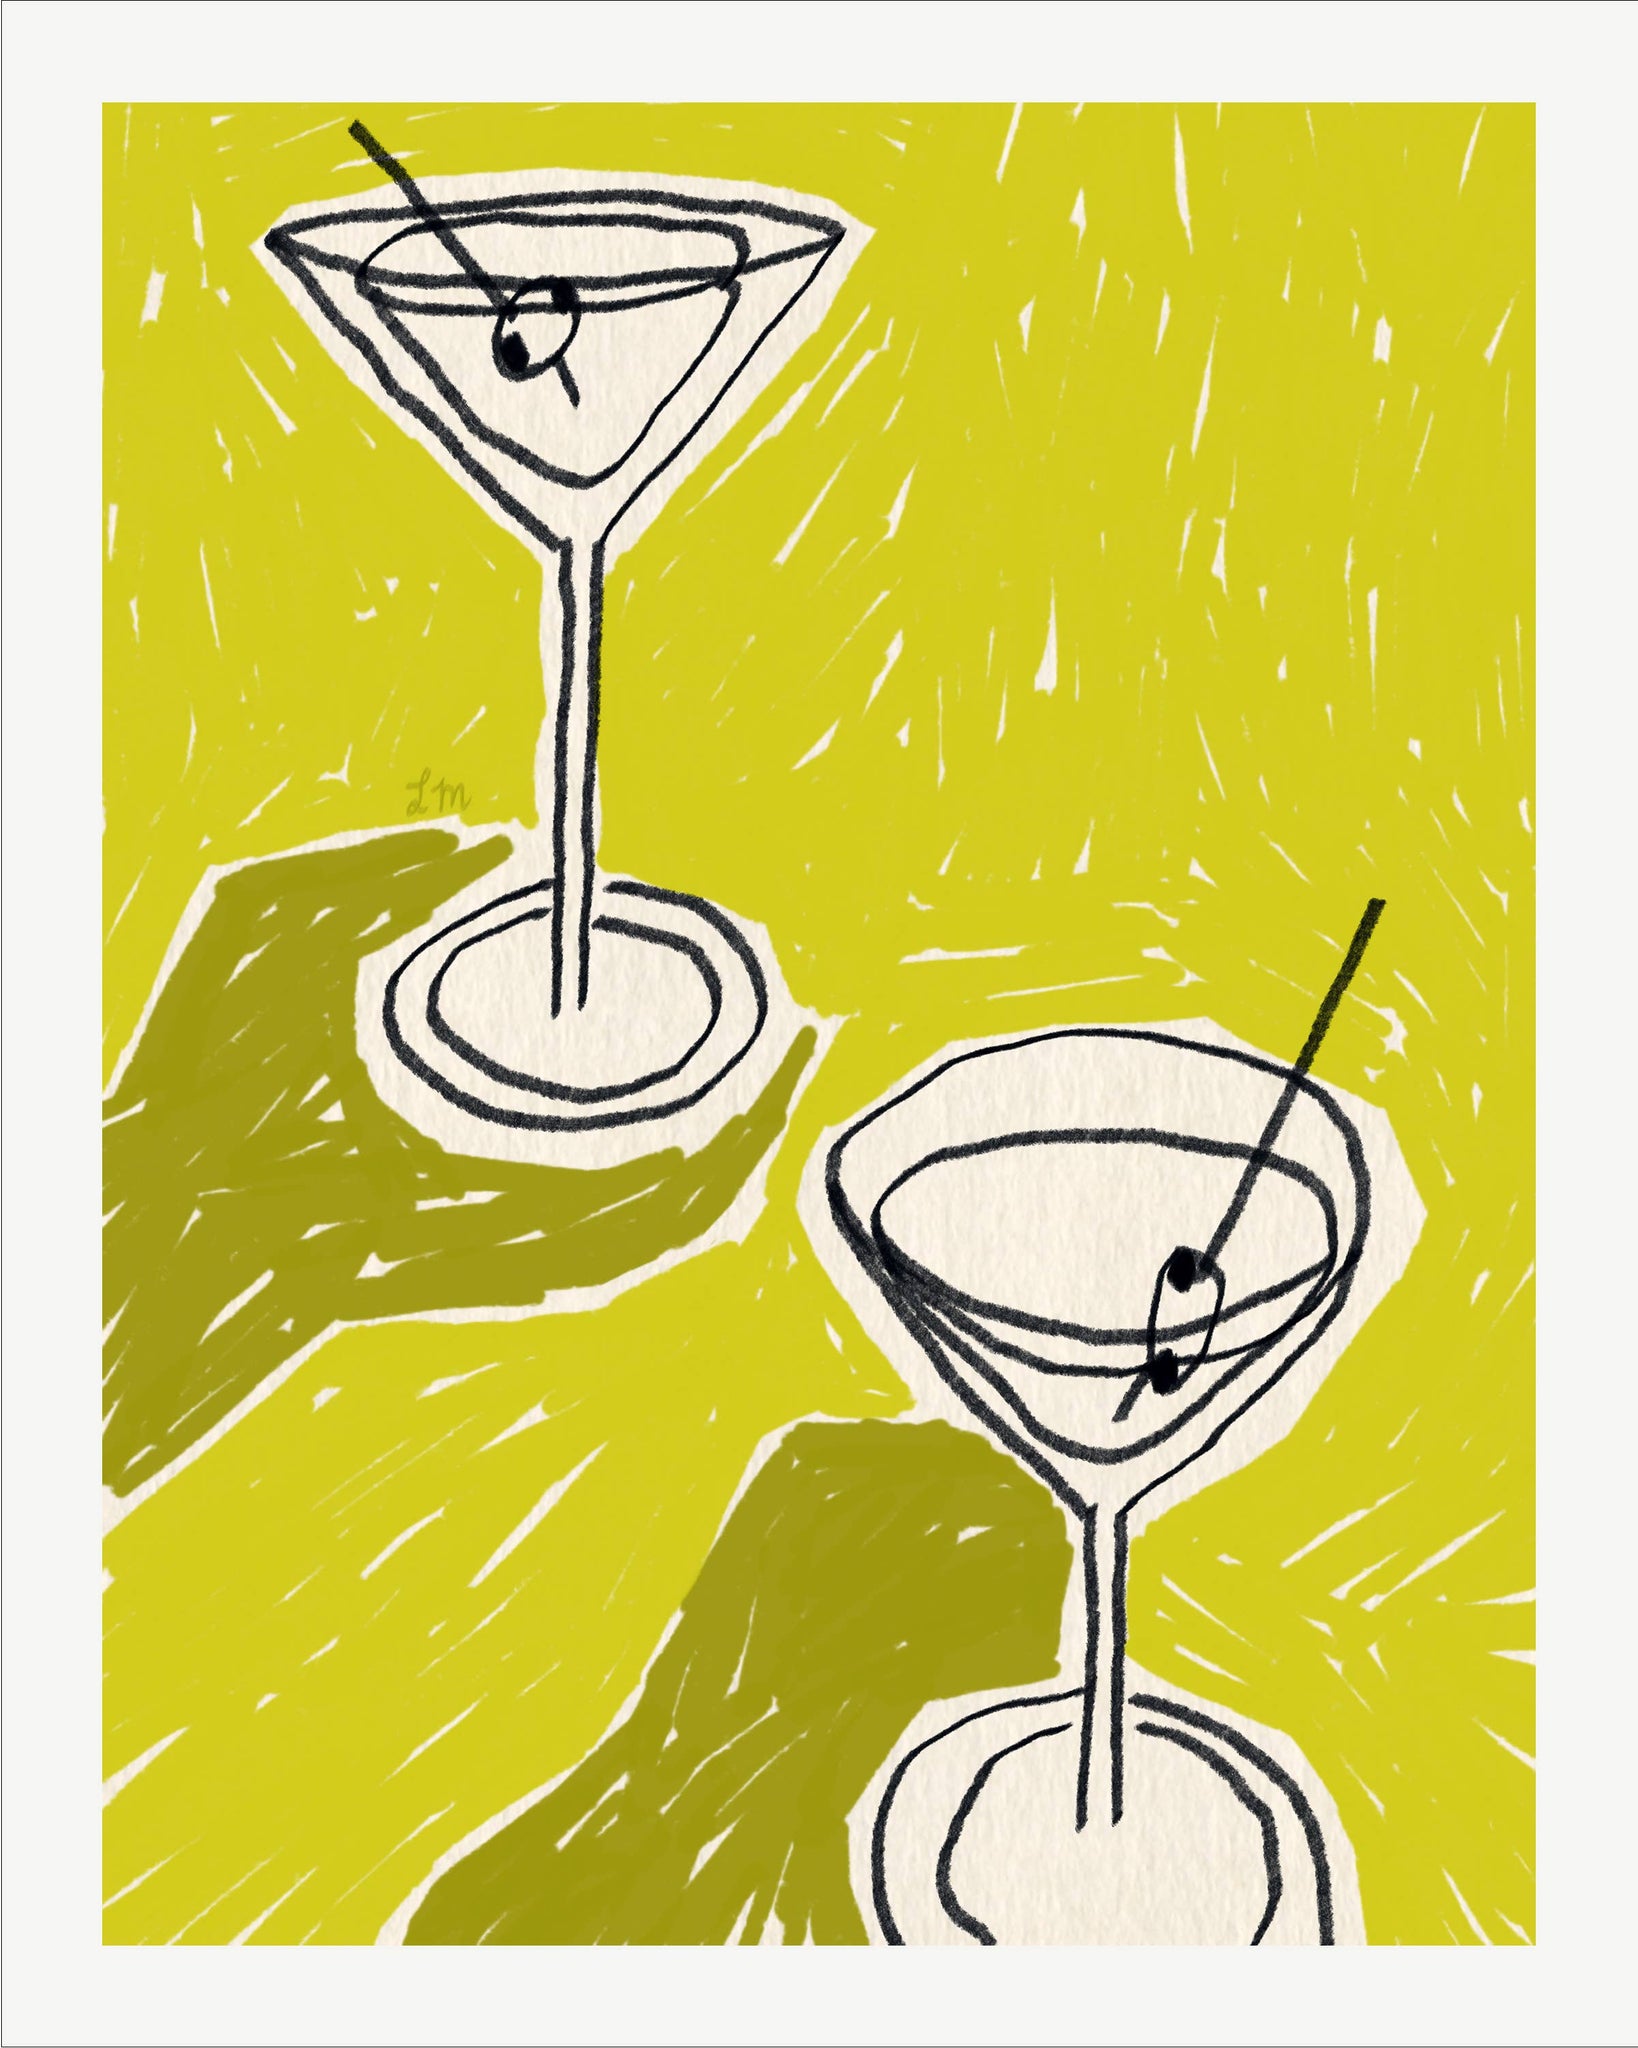 MARTINI MINI PRINT BY LACEY MCKEEVER